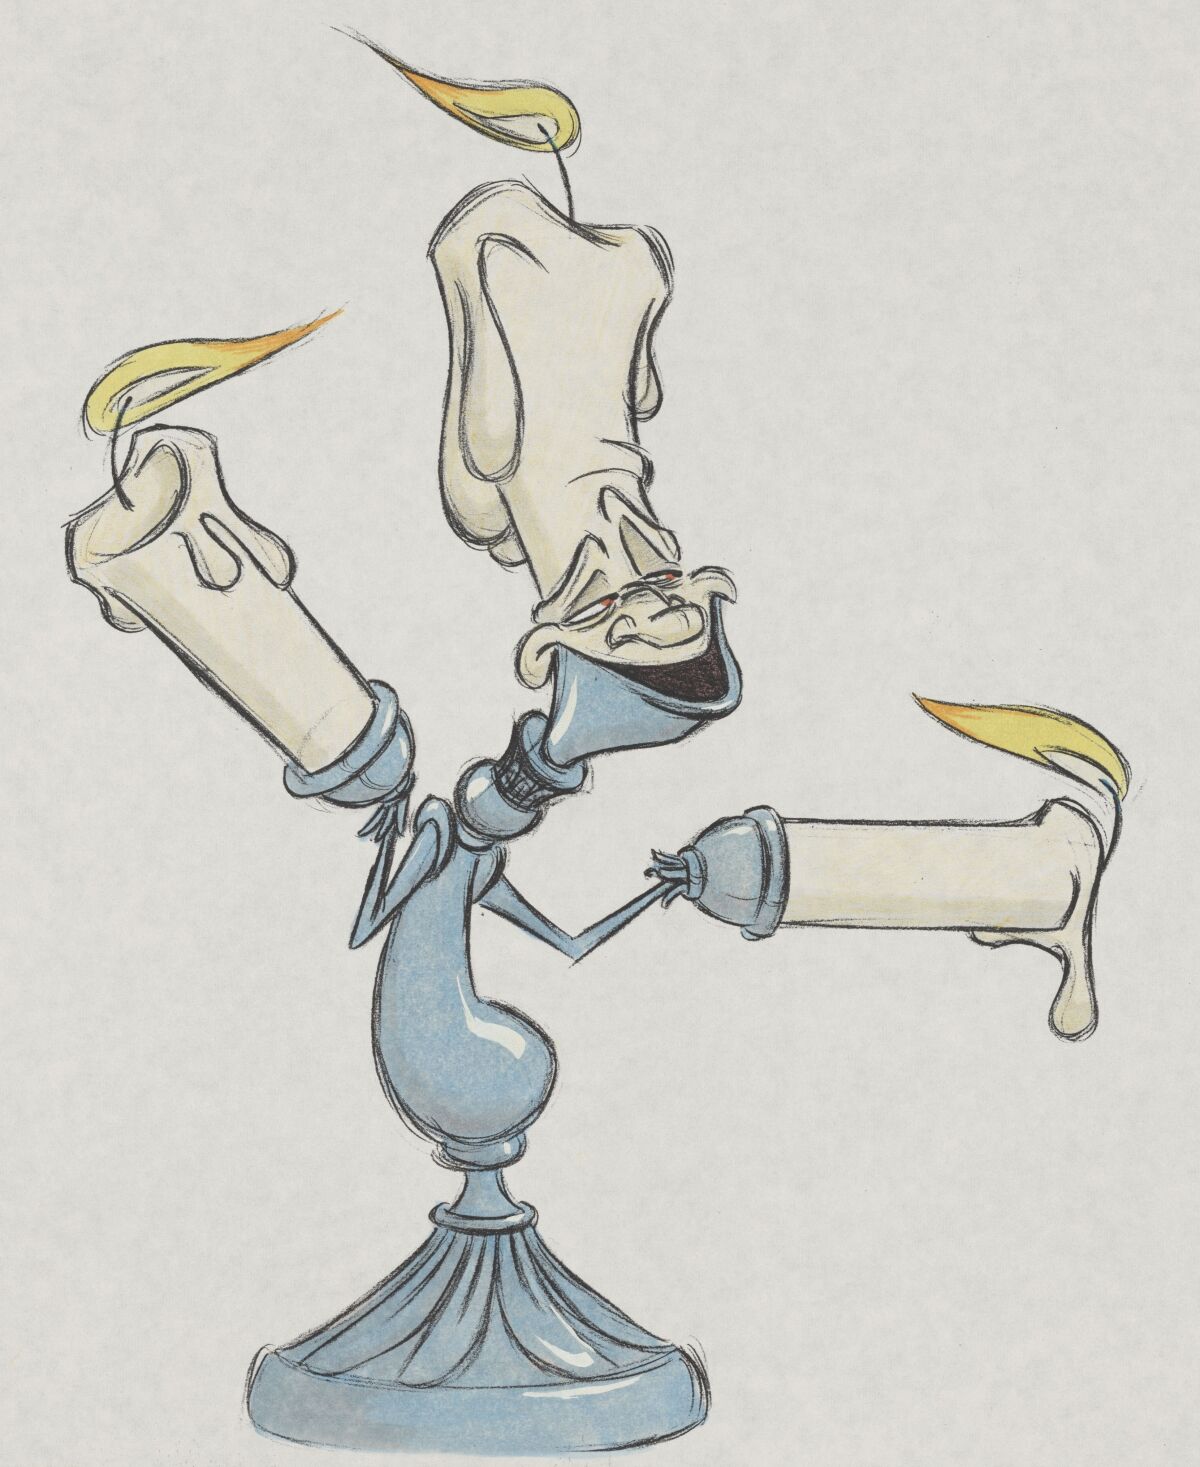 Concept art for the character of Lumiere from "Beauty and the Beast."